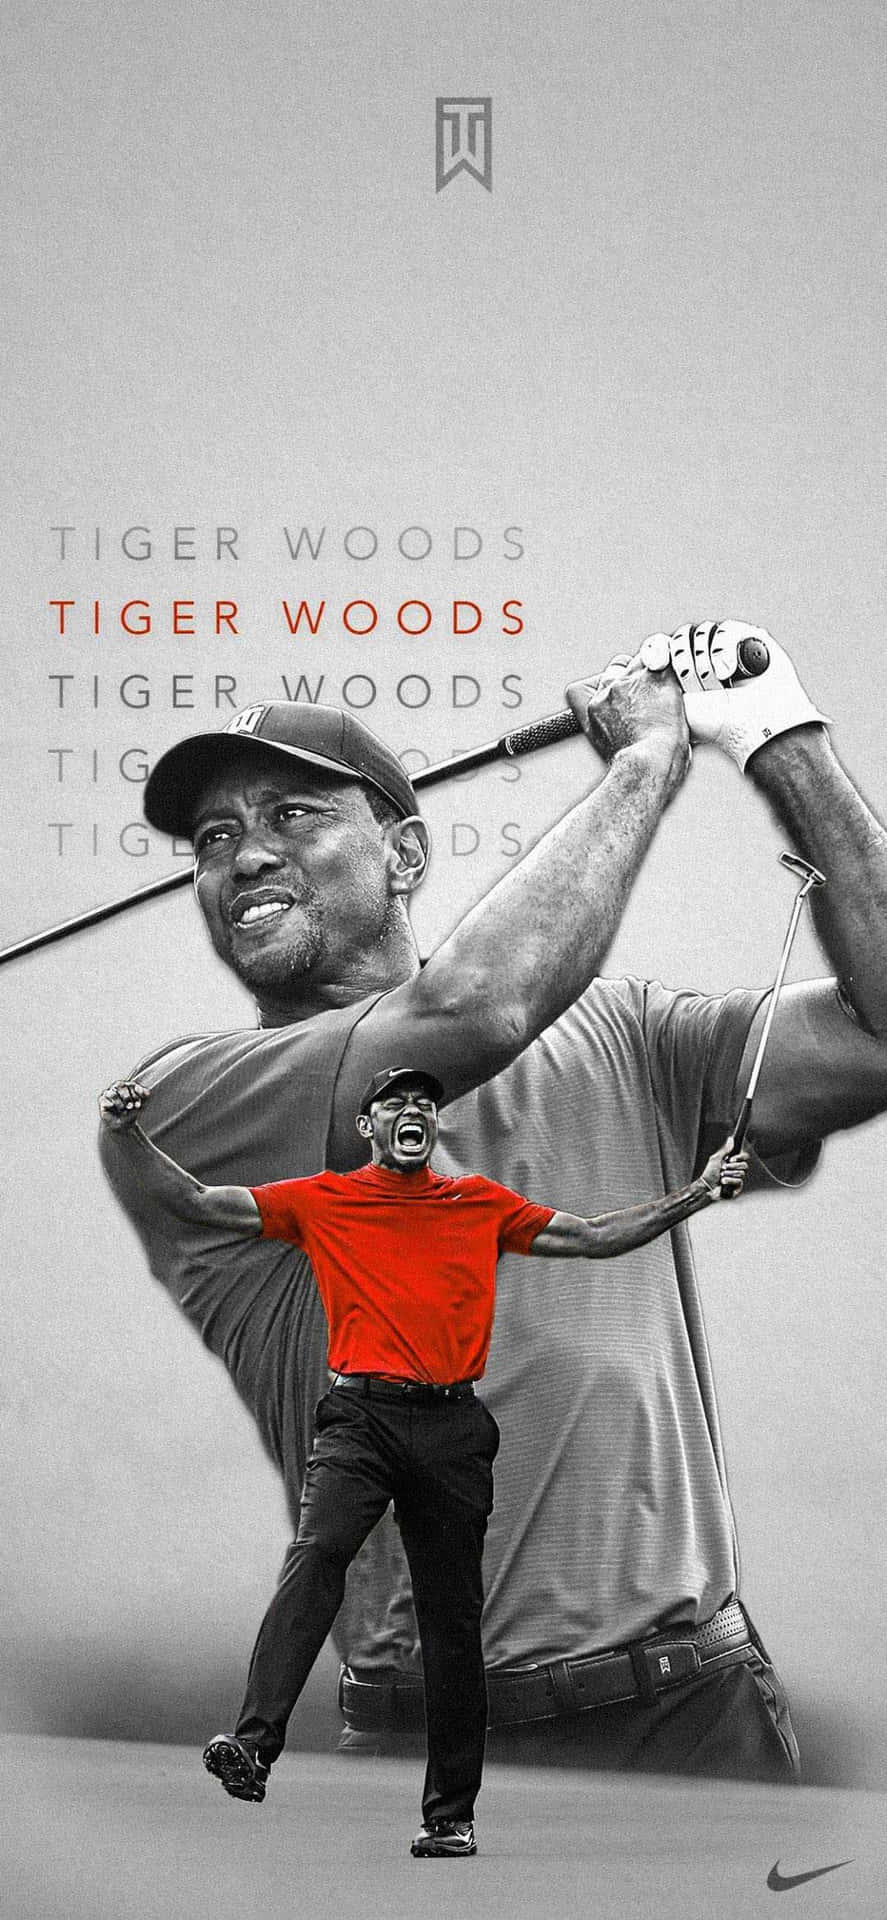 The Best Is Tiger Woods Iphone Wallpaper